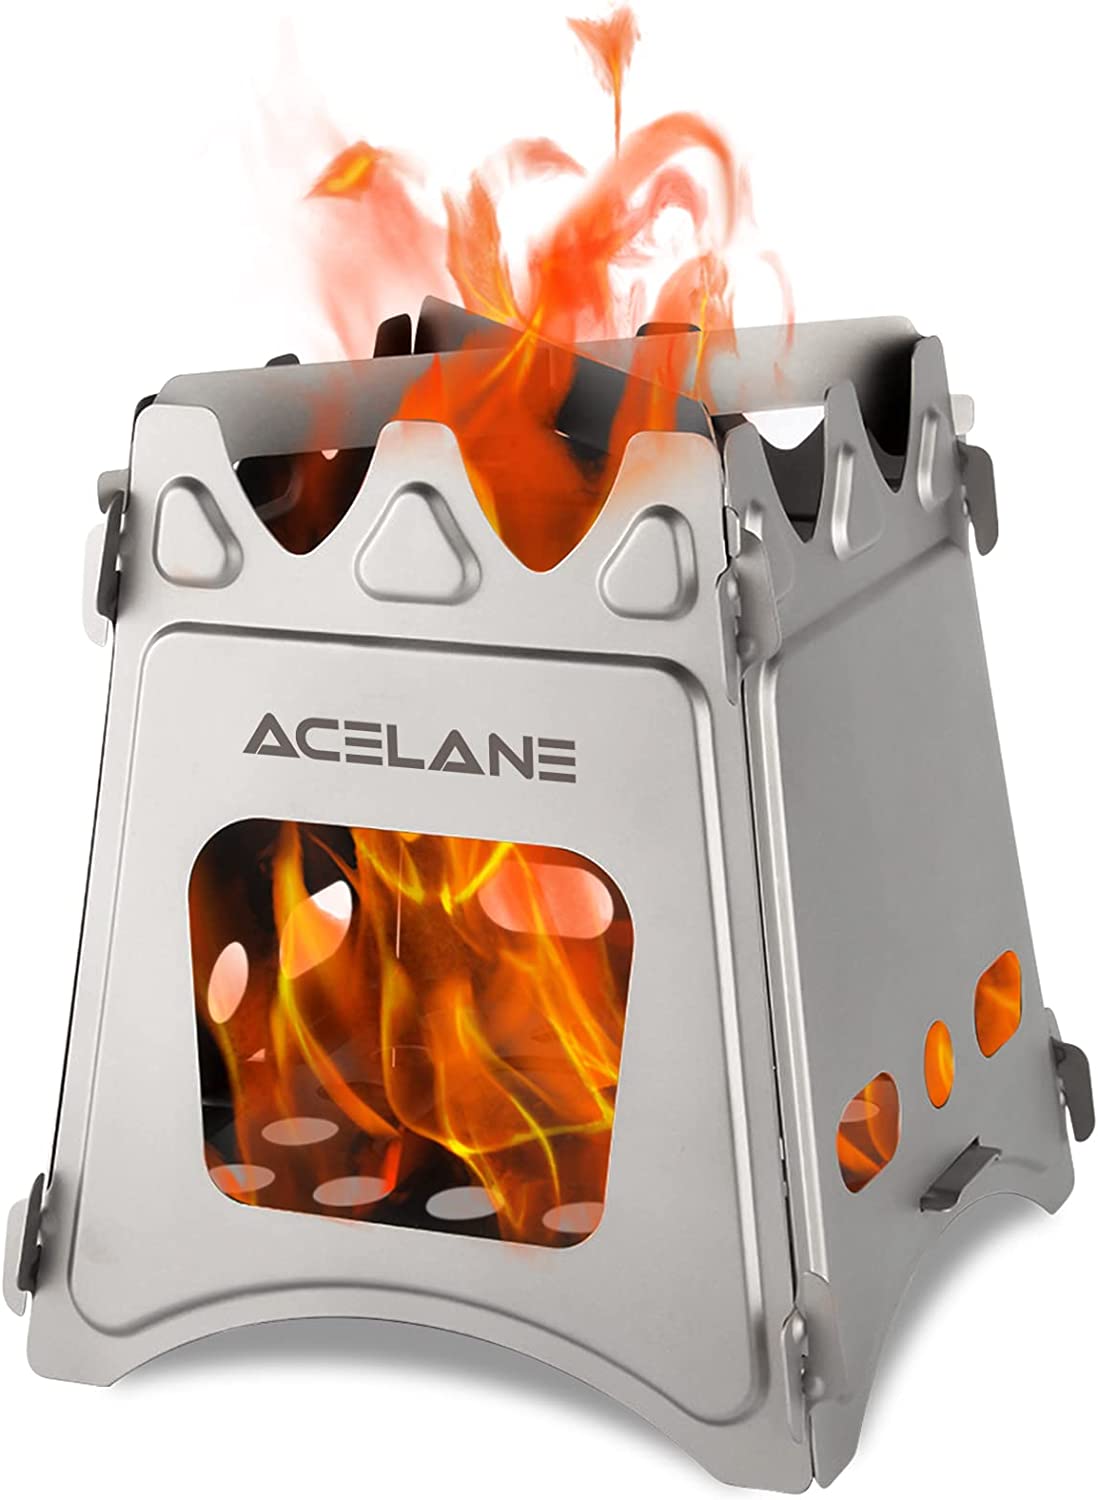 Acelane Camping Stove Stainless Steel Wood Burning Stove Camping Backpacking Stove Folding Portable Wood Stove for Picnic BBQ Camp Hiking Hunting Traveling Survival Emergency Preparedness